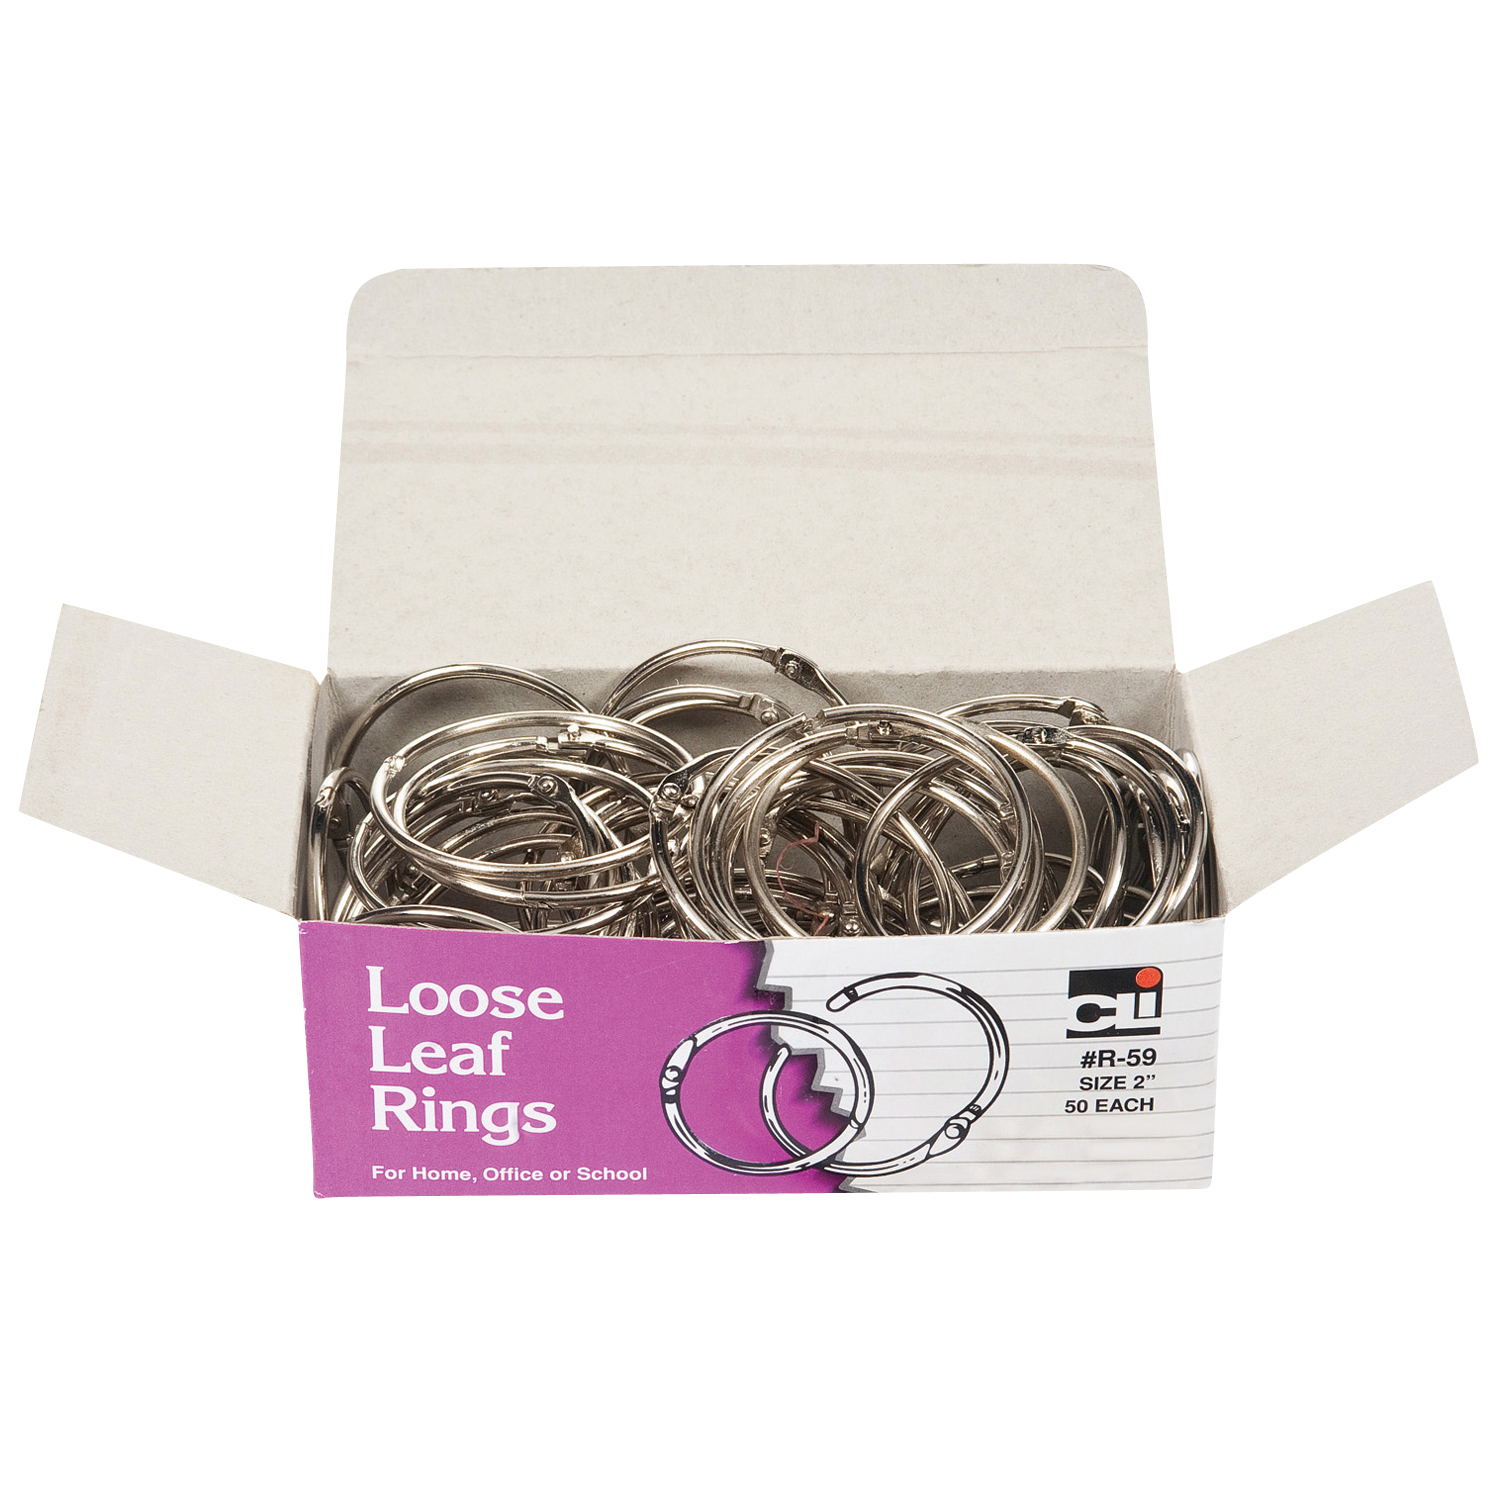 Loose Leaf Rings with Snap Closure, Nickel Plated, 2 Inch Diameter, 50/Box